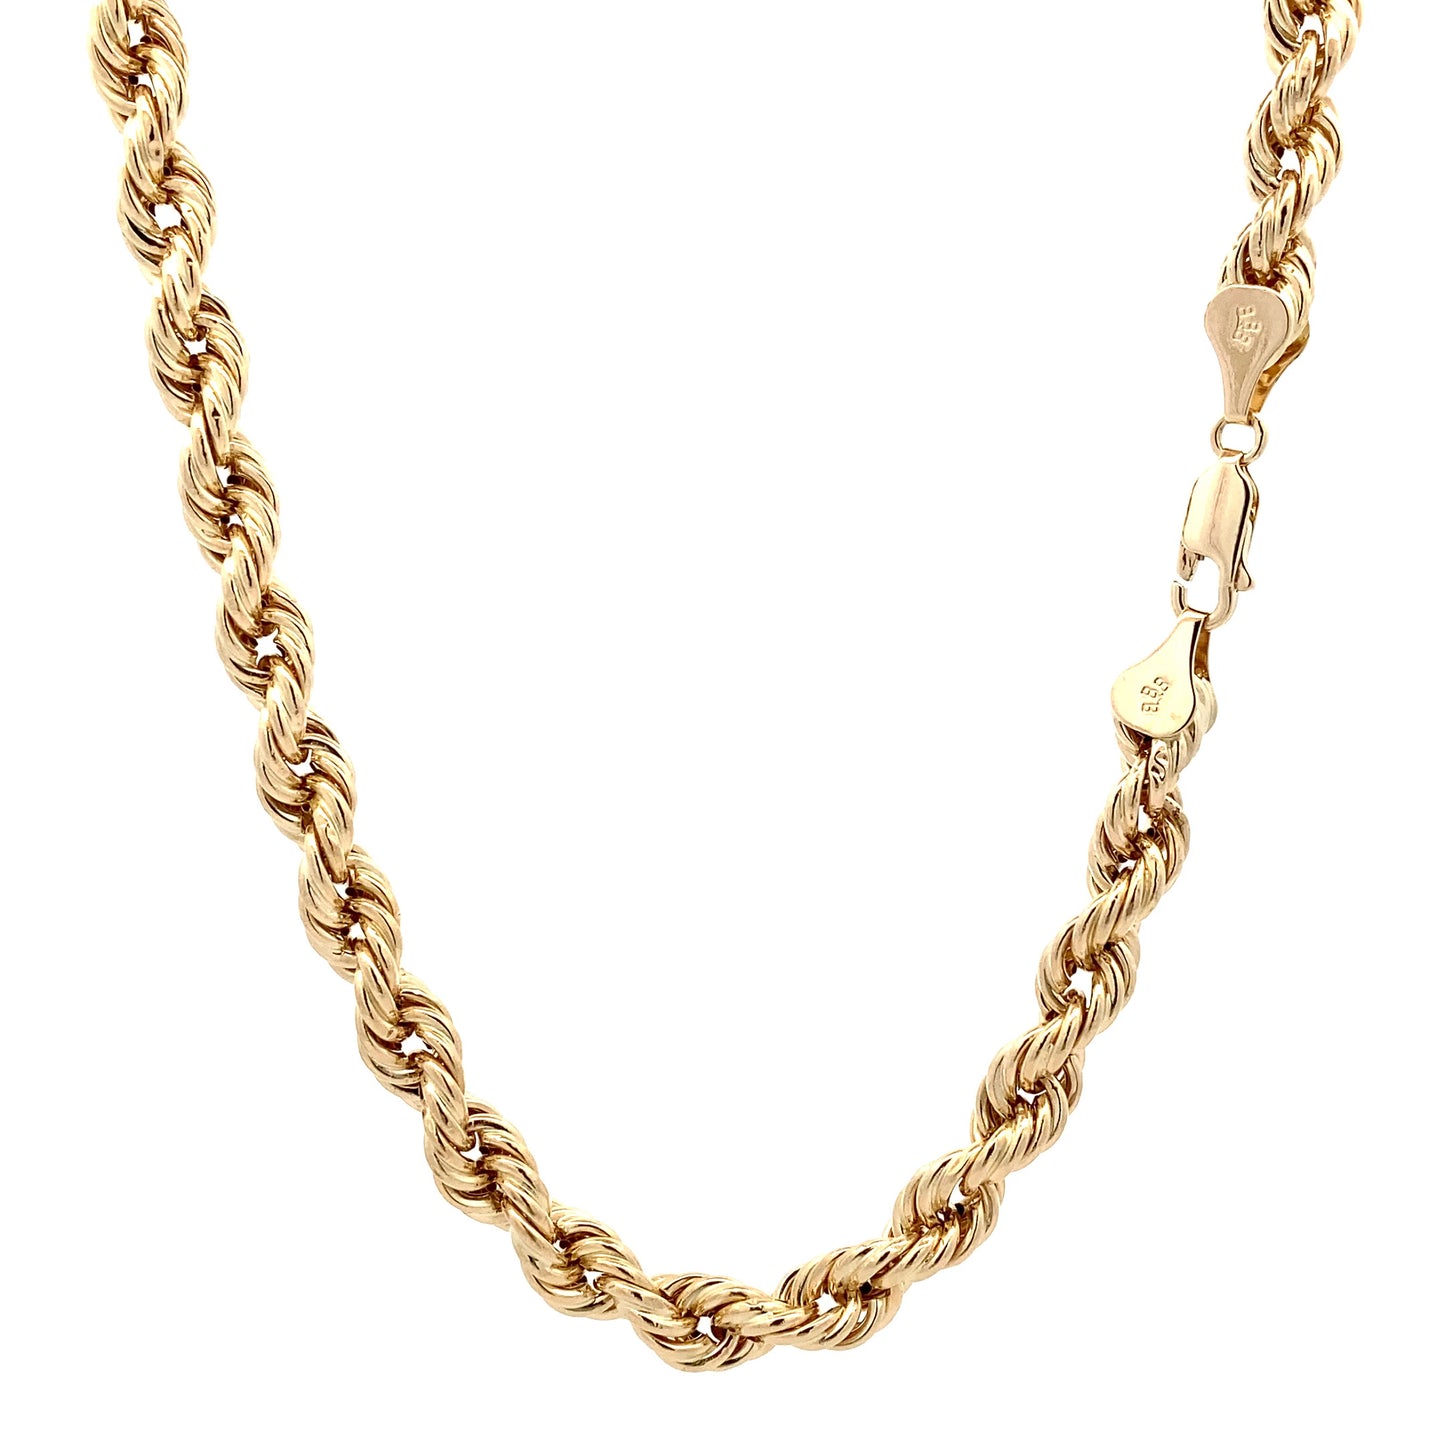 10K Yellow Gold 24.25" Hollow Rope Chain